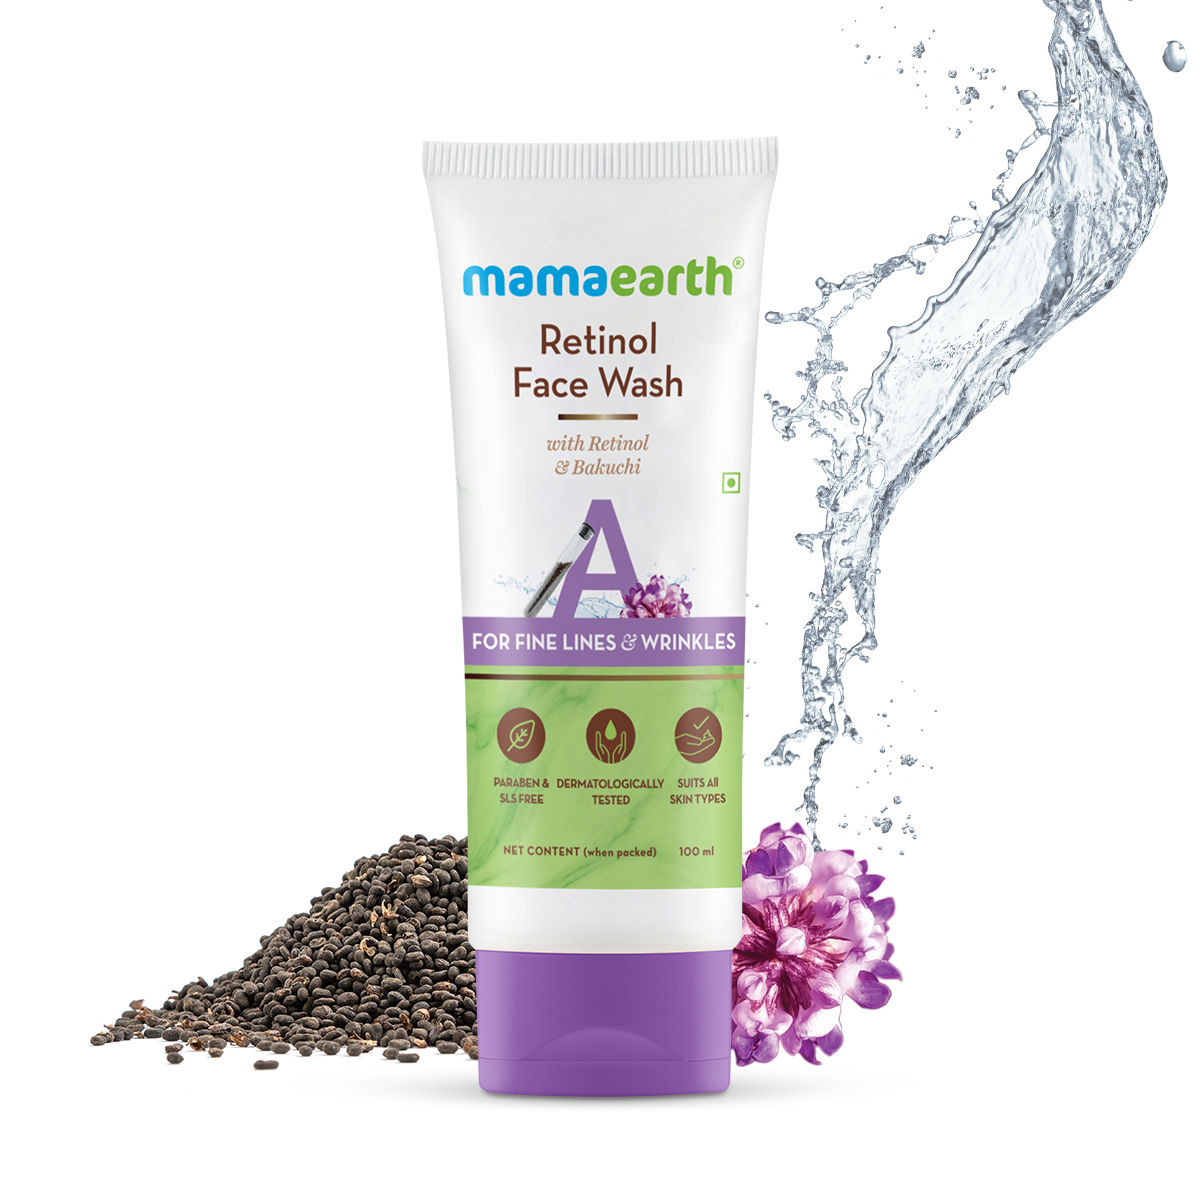 Mamaearth Retinol Face Wash with Retinol & Bakuchi for Fine Lines and Wrinkles (100 ml)